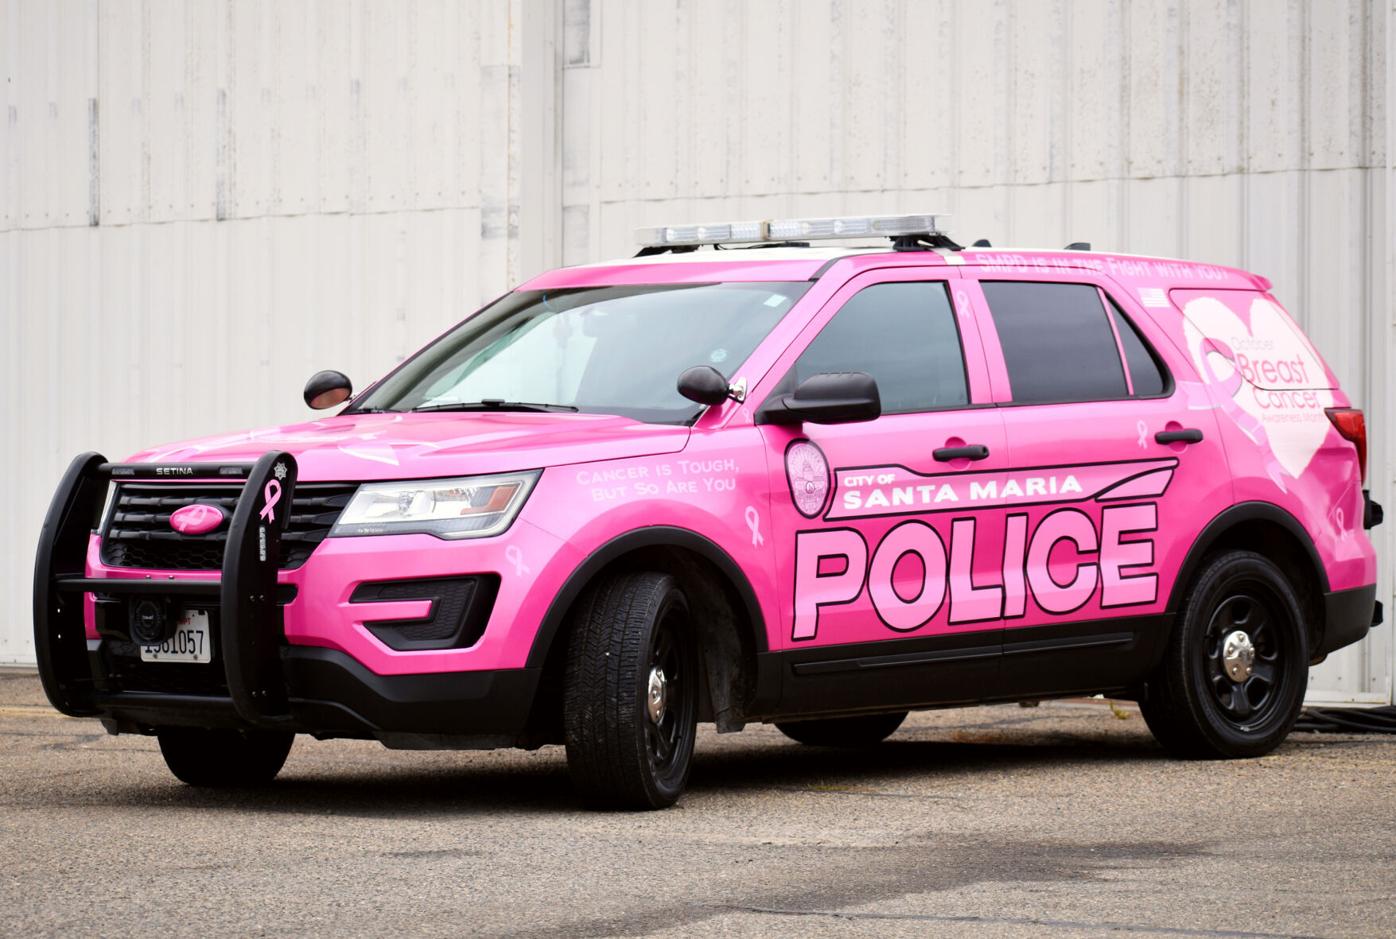 Santa Maria Police Department shows off pink cruiser to promote